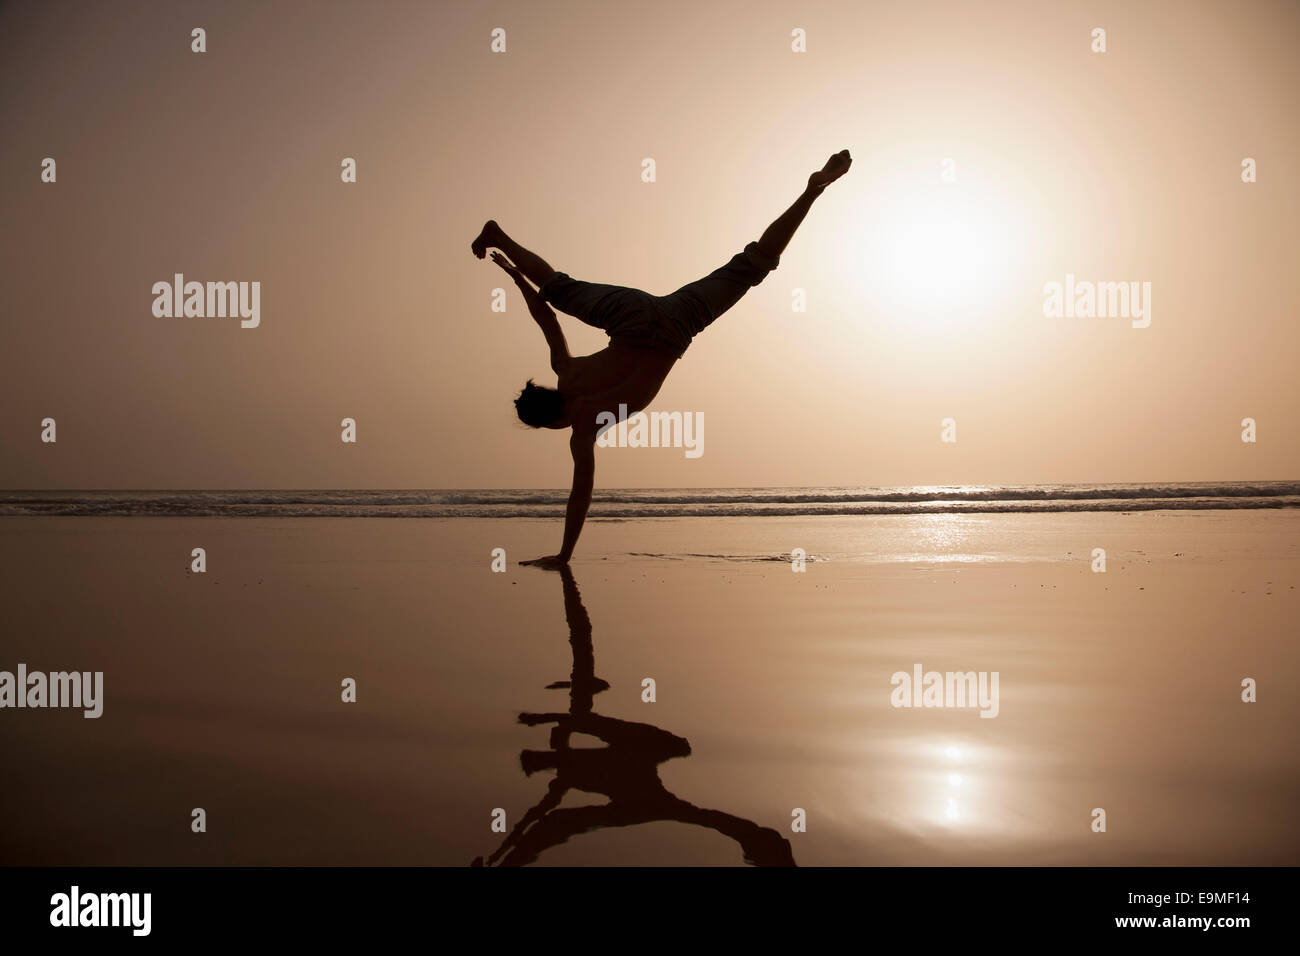 Full length of silhouette man performing handstand at beach Stock Photo